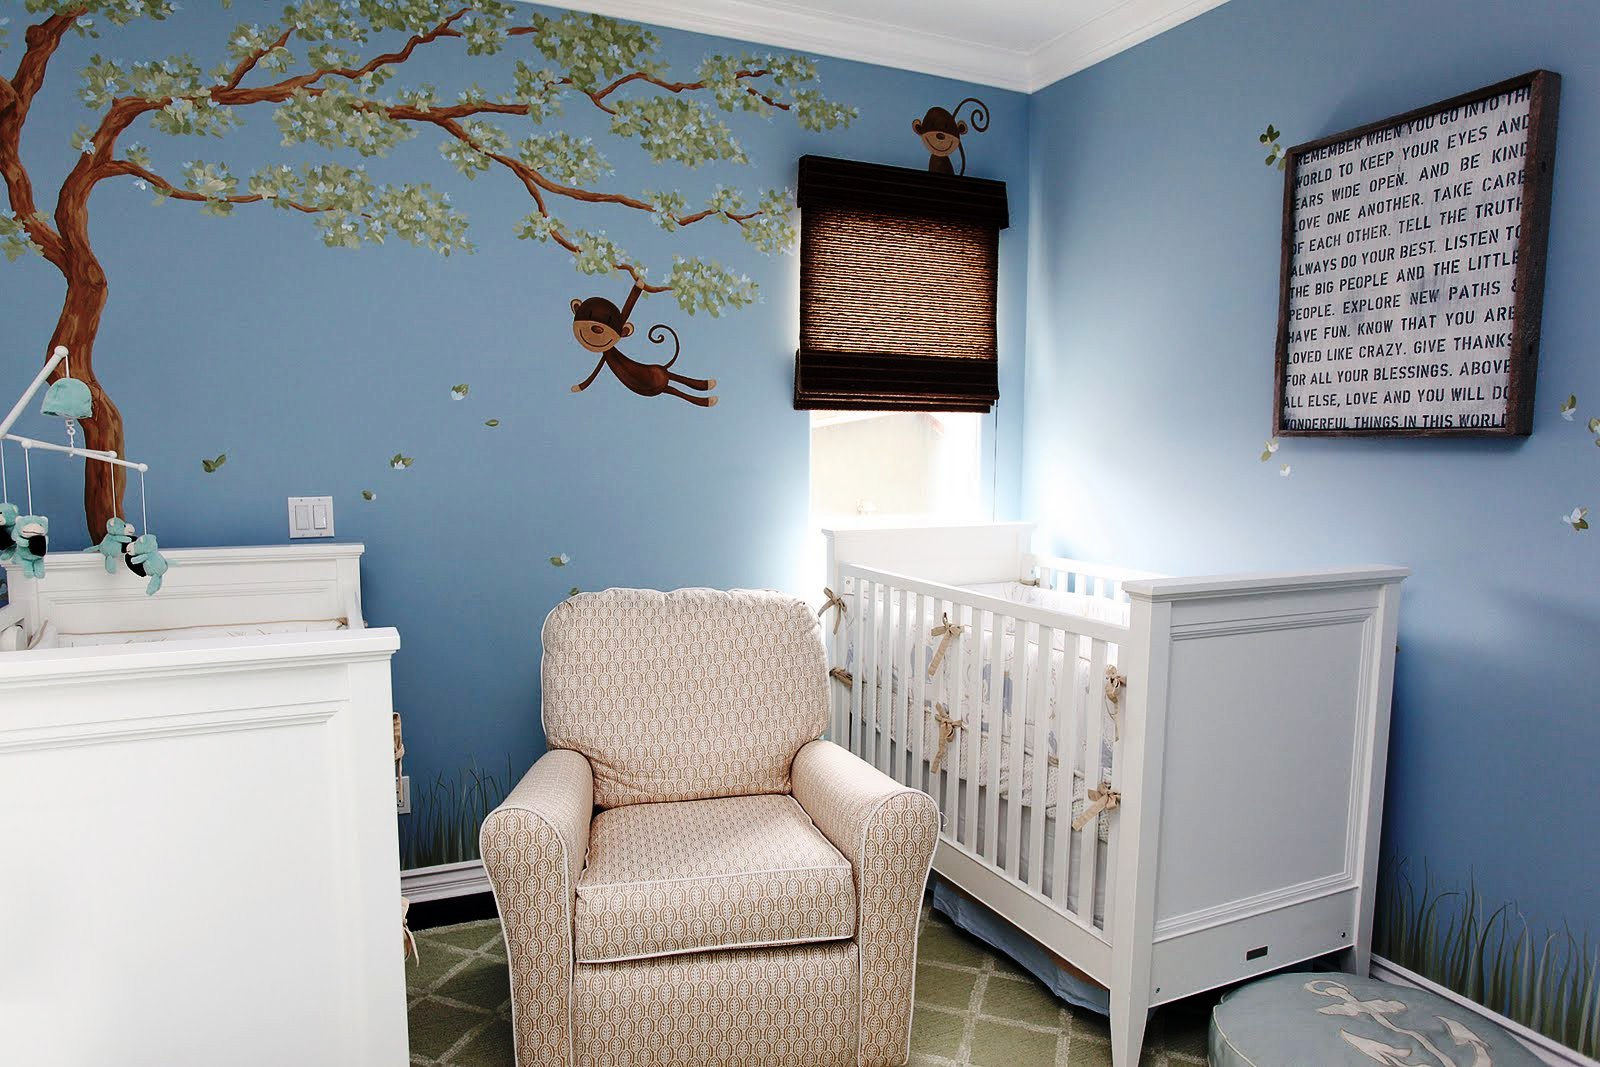 Monkey Themed Nursery Fabulous Monkey Themed Baby Boy Nursery Interior Idea Painted In Blue With White Mini Crib Bedding And Dresser Kids Room  Astonishing Mini Crib Bedding Designed In Minimalist Model For Mansion